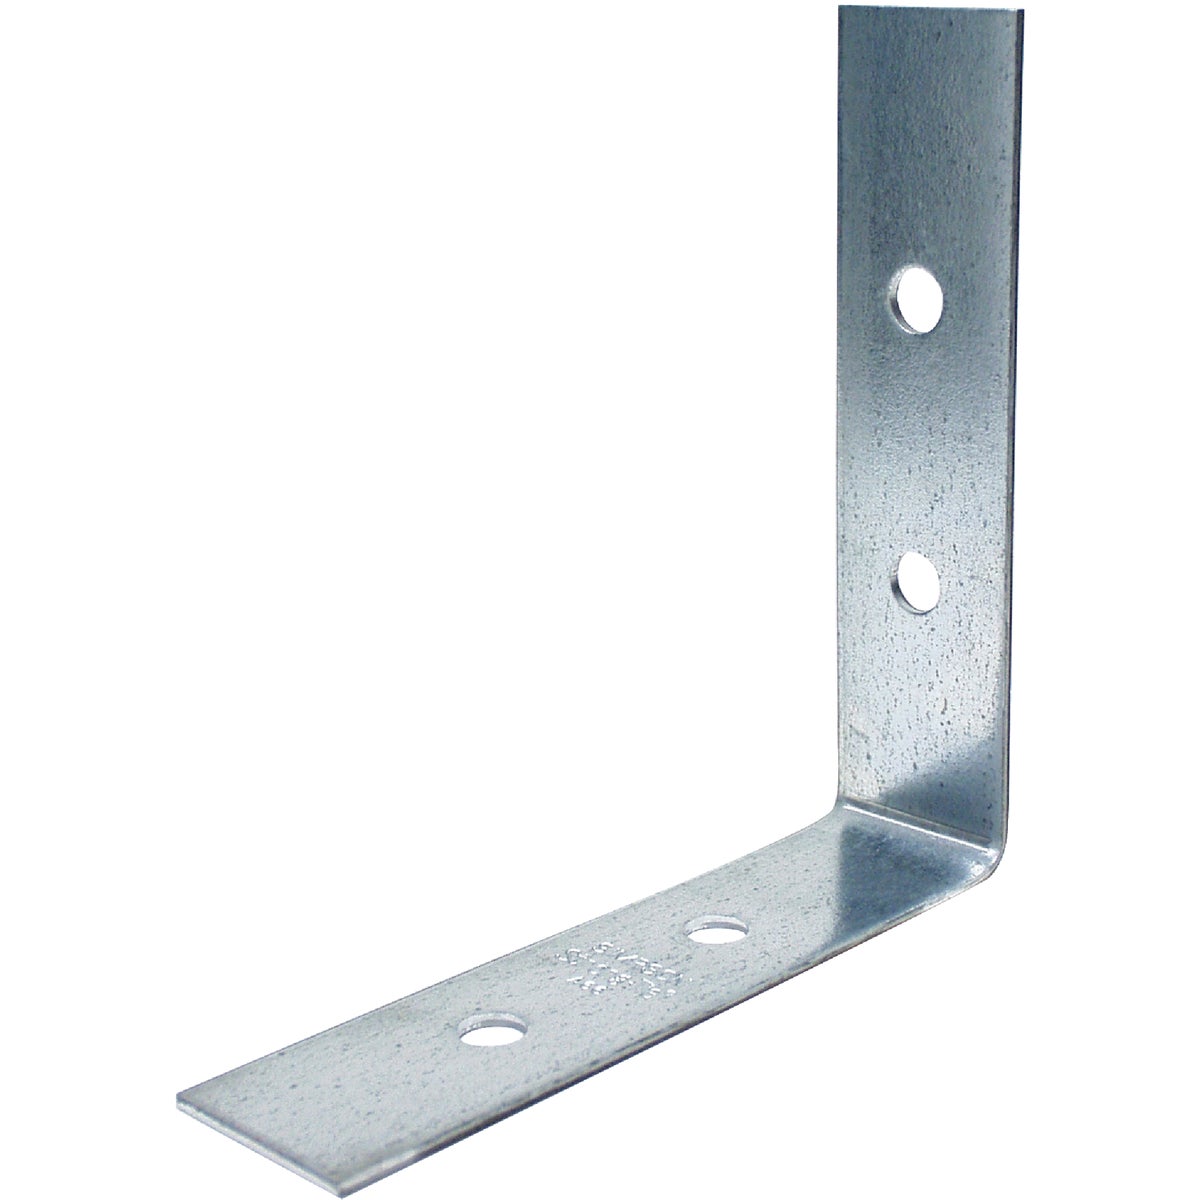 Simpson Strong-Tie 5-7/8 In. x 5-7/8 In. x 1-1/2 In. Galvanized Steel 12 ga Reinforcing Angle